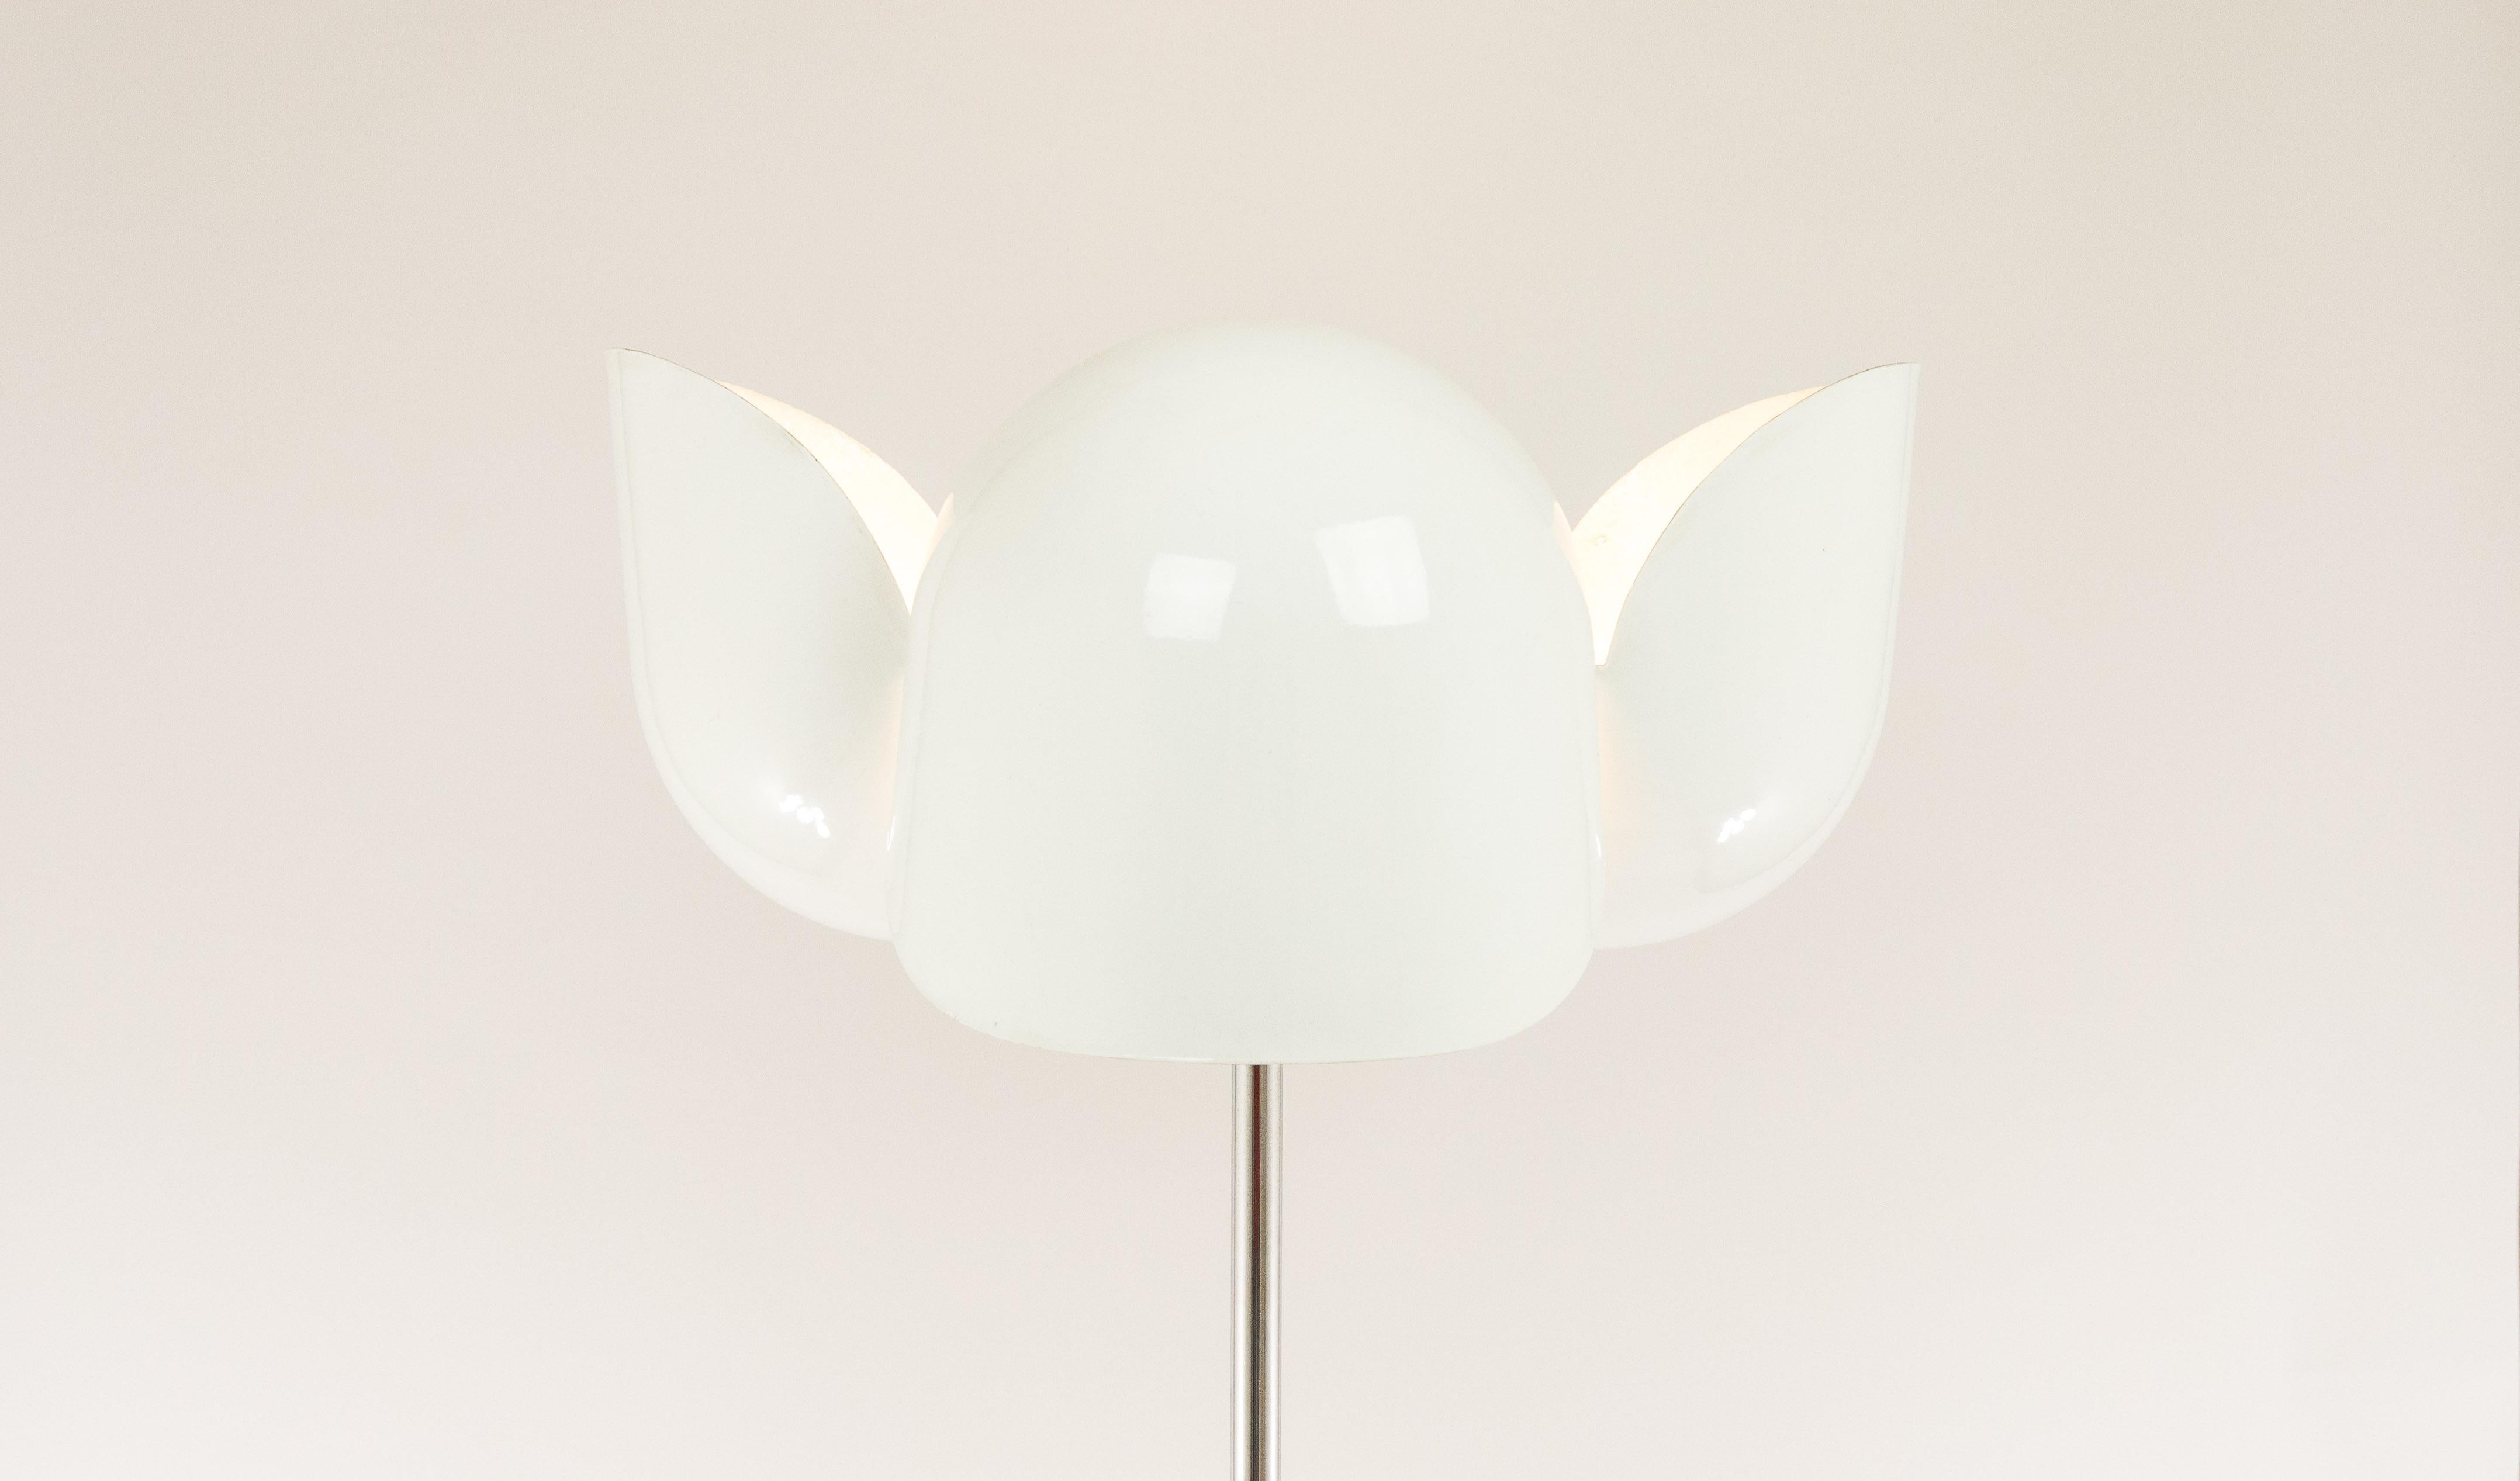 Astonishing floor lamp Dafne designed by Olaf von Bohr for Italian manufacturer Valenti.

The shade from the lamp is made of fiberglass; it consists of two parts which together form the shape of a flower. The on/off switch has two positions, which